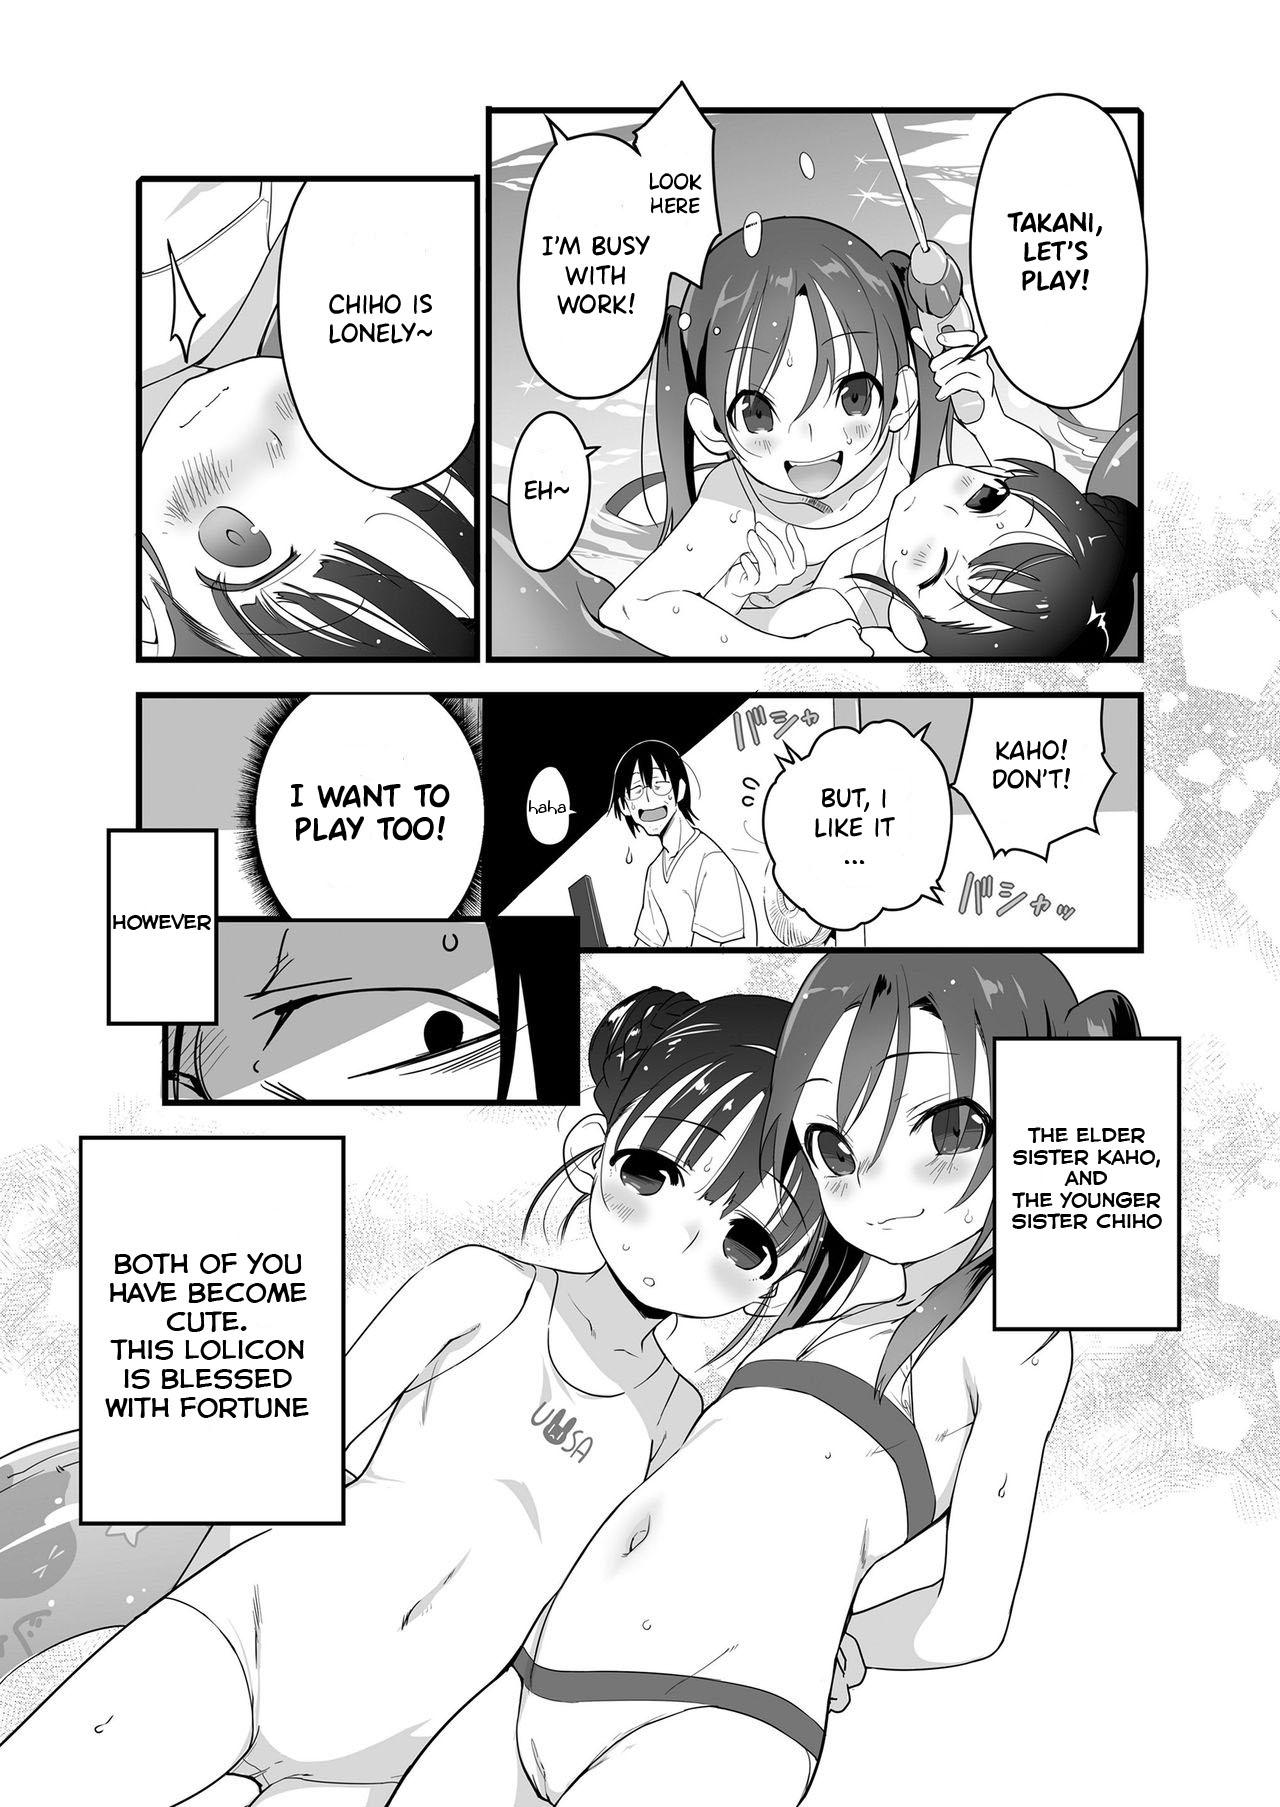 Bisex Uchiage Hanabi, Ane to Miruka? Imouto to Miruka? | Fireworks, Should we see it with the elder sister or the younger sister? Pegging - Page 3